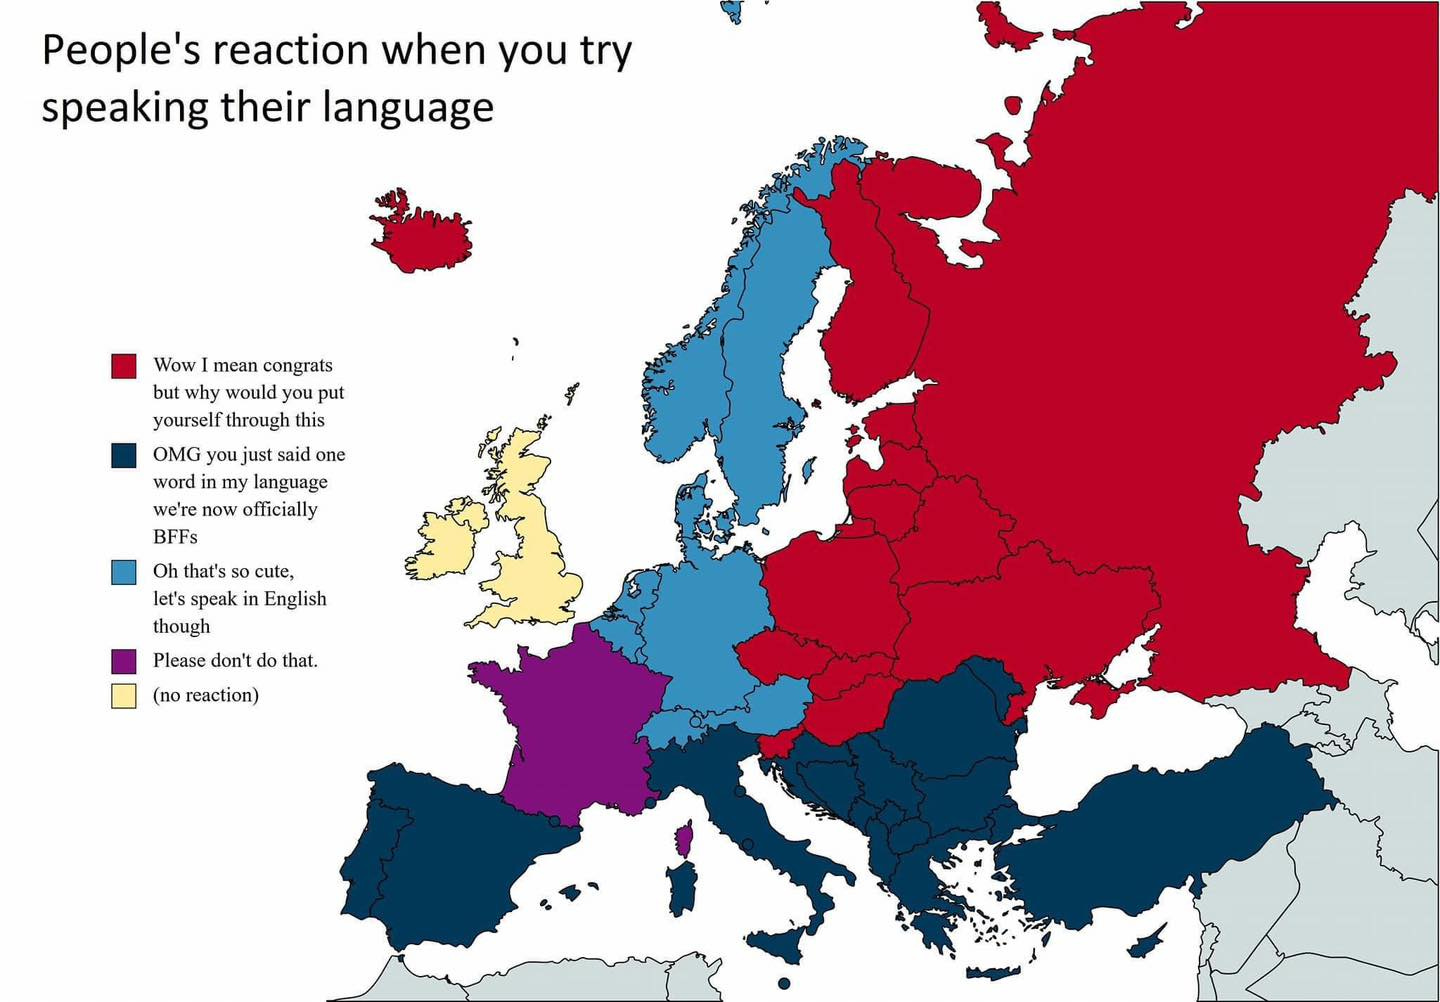 Map of Europe. People's reaction when you try speaking their language. Countries marked by colours and a description is given on the side.

Wow I mean congrats but why would you put yourself through this - Iceland, Slovenia, Hungary, Czechia, Slovakia, Poland, Ukraine and everything North-East from there, including Finland.

OMG you just said one word in my language we're now officially BFFs - Spain, Portugal, Italy, Balears, Sardegna, Balkan countries, Turkey, Cyprus

Oh, that's so cute, let's speak English though - Switzerland, Austria, Germany, Belgium, Netherlands, Denmark, Sweden, Norway

Please don't do that - France (including Corse)

(no reaction) - UK, Ireland